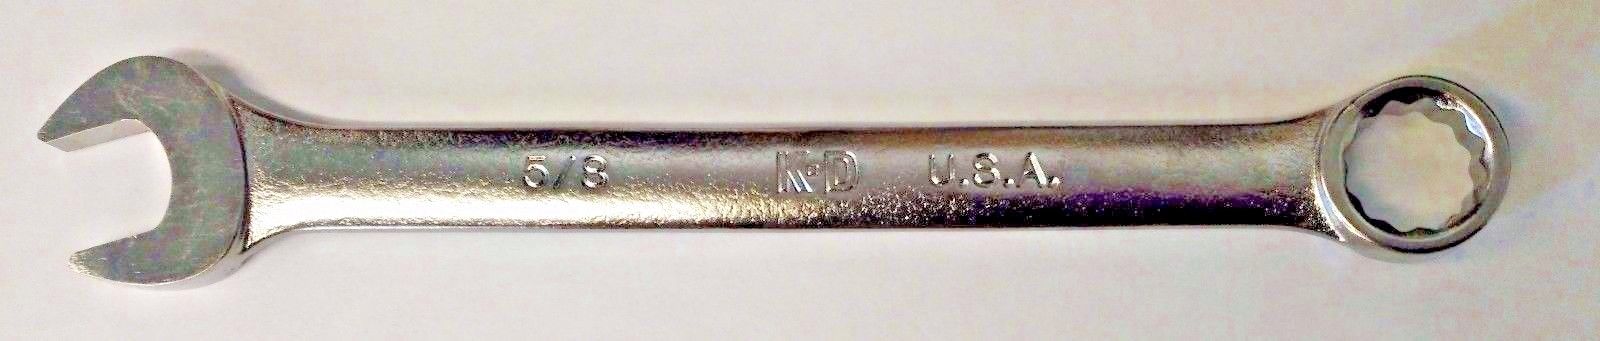 KD Tools 63120 5/8" 12 Point Combination Wrench USA